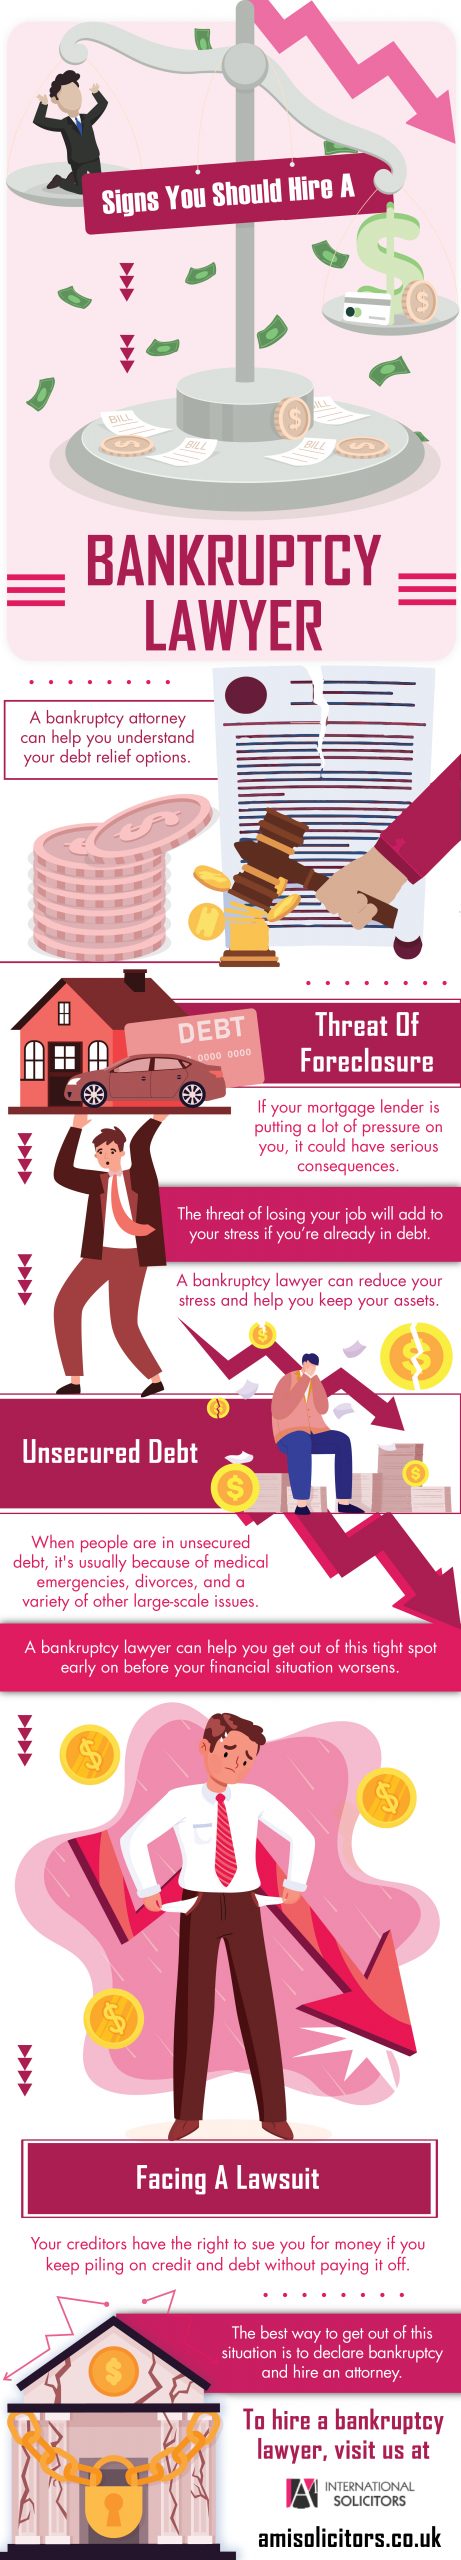 Signs You Should Hire Bankruptcy Lawyer - AM International Solicitors